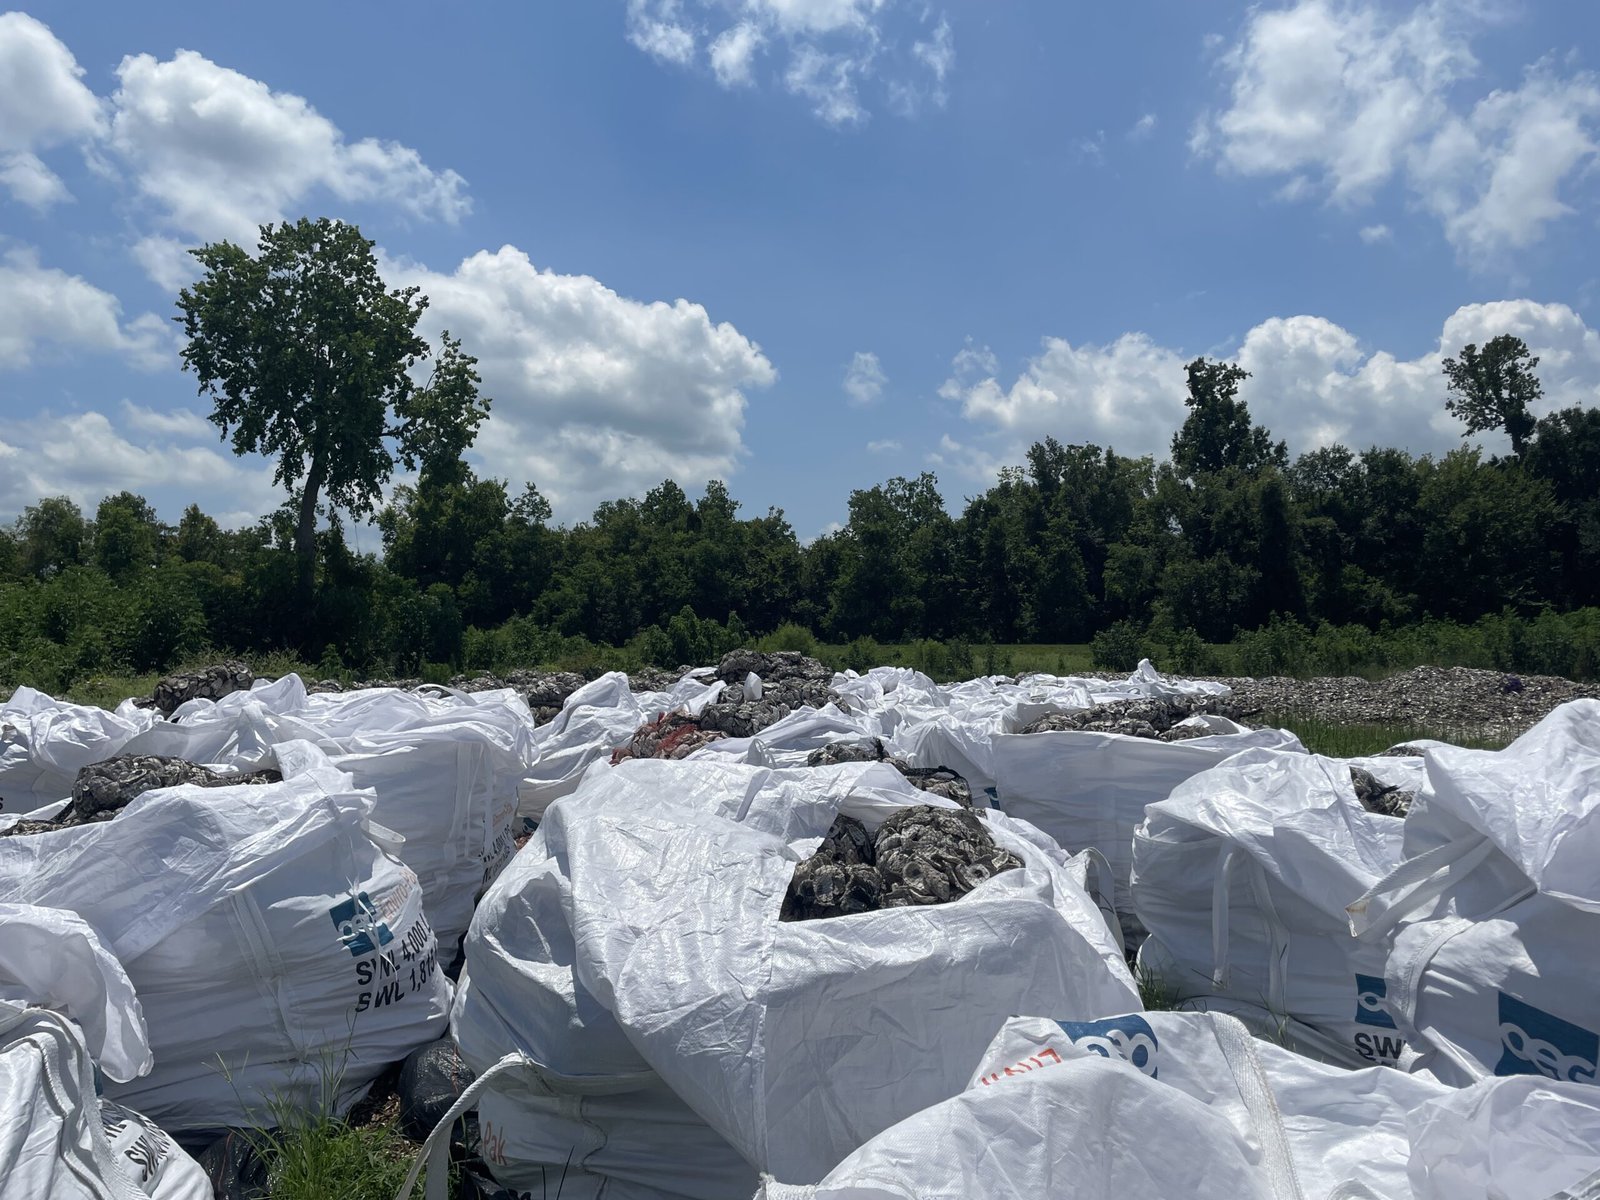 Oyster shells in marine-grade bags, ready to be returned to the water.